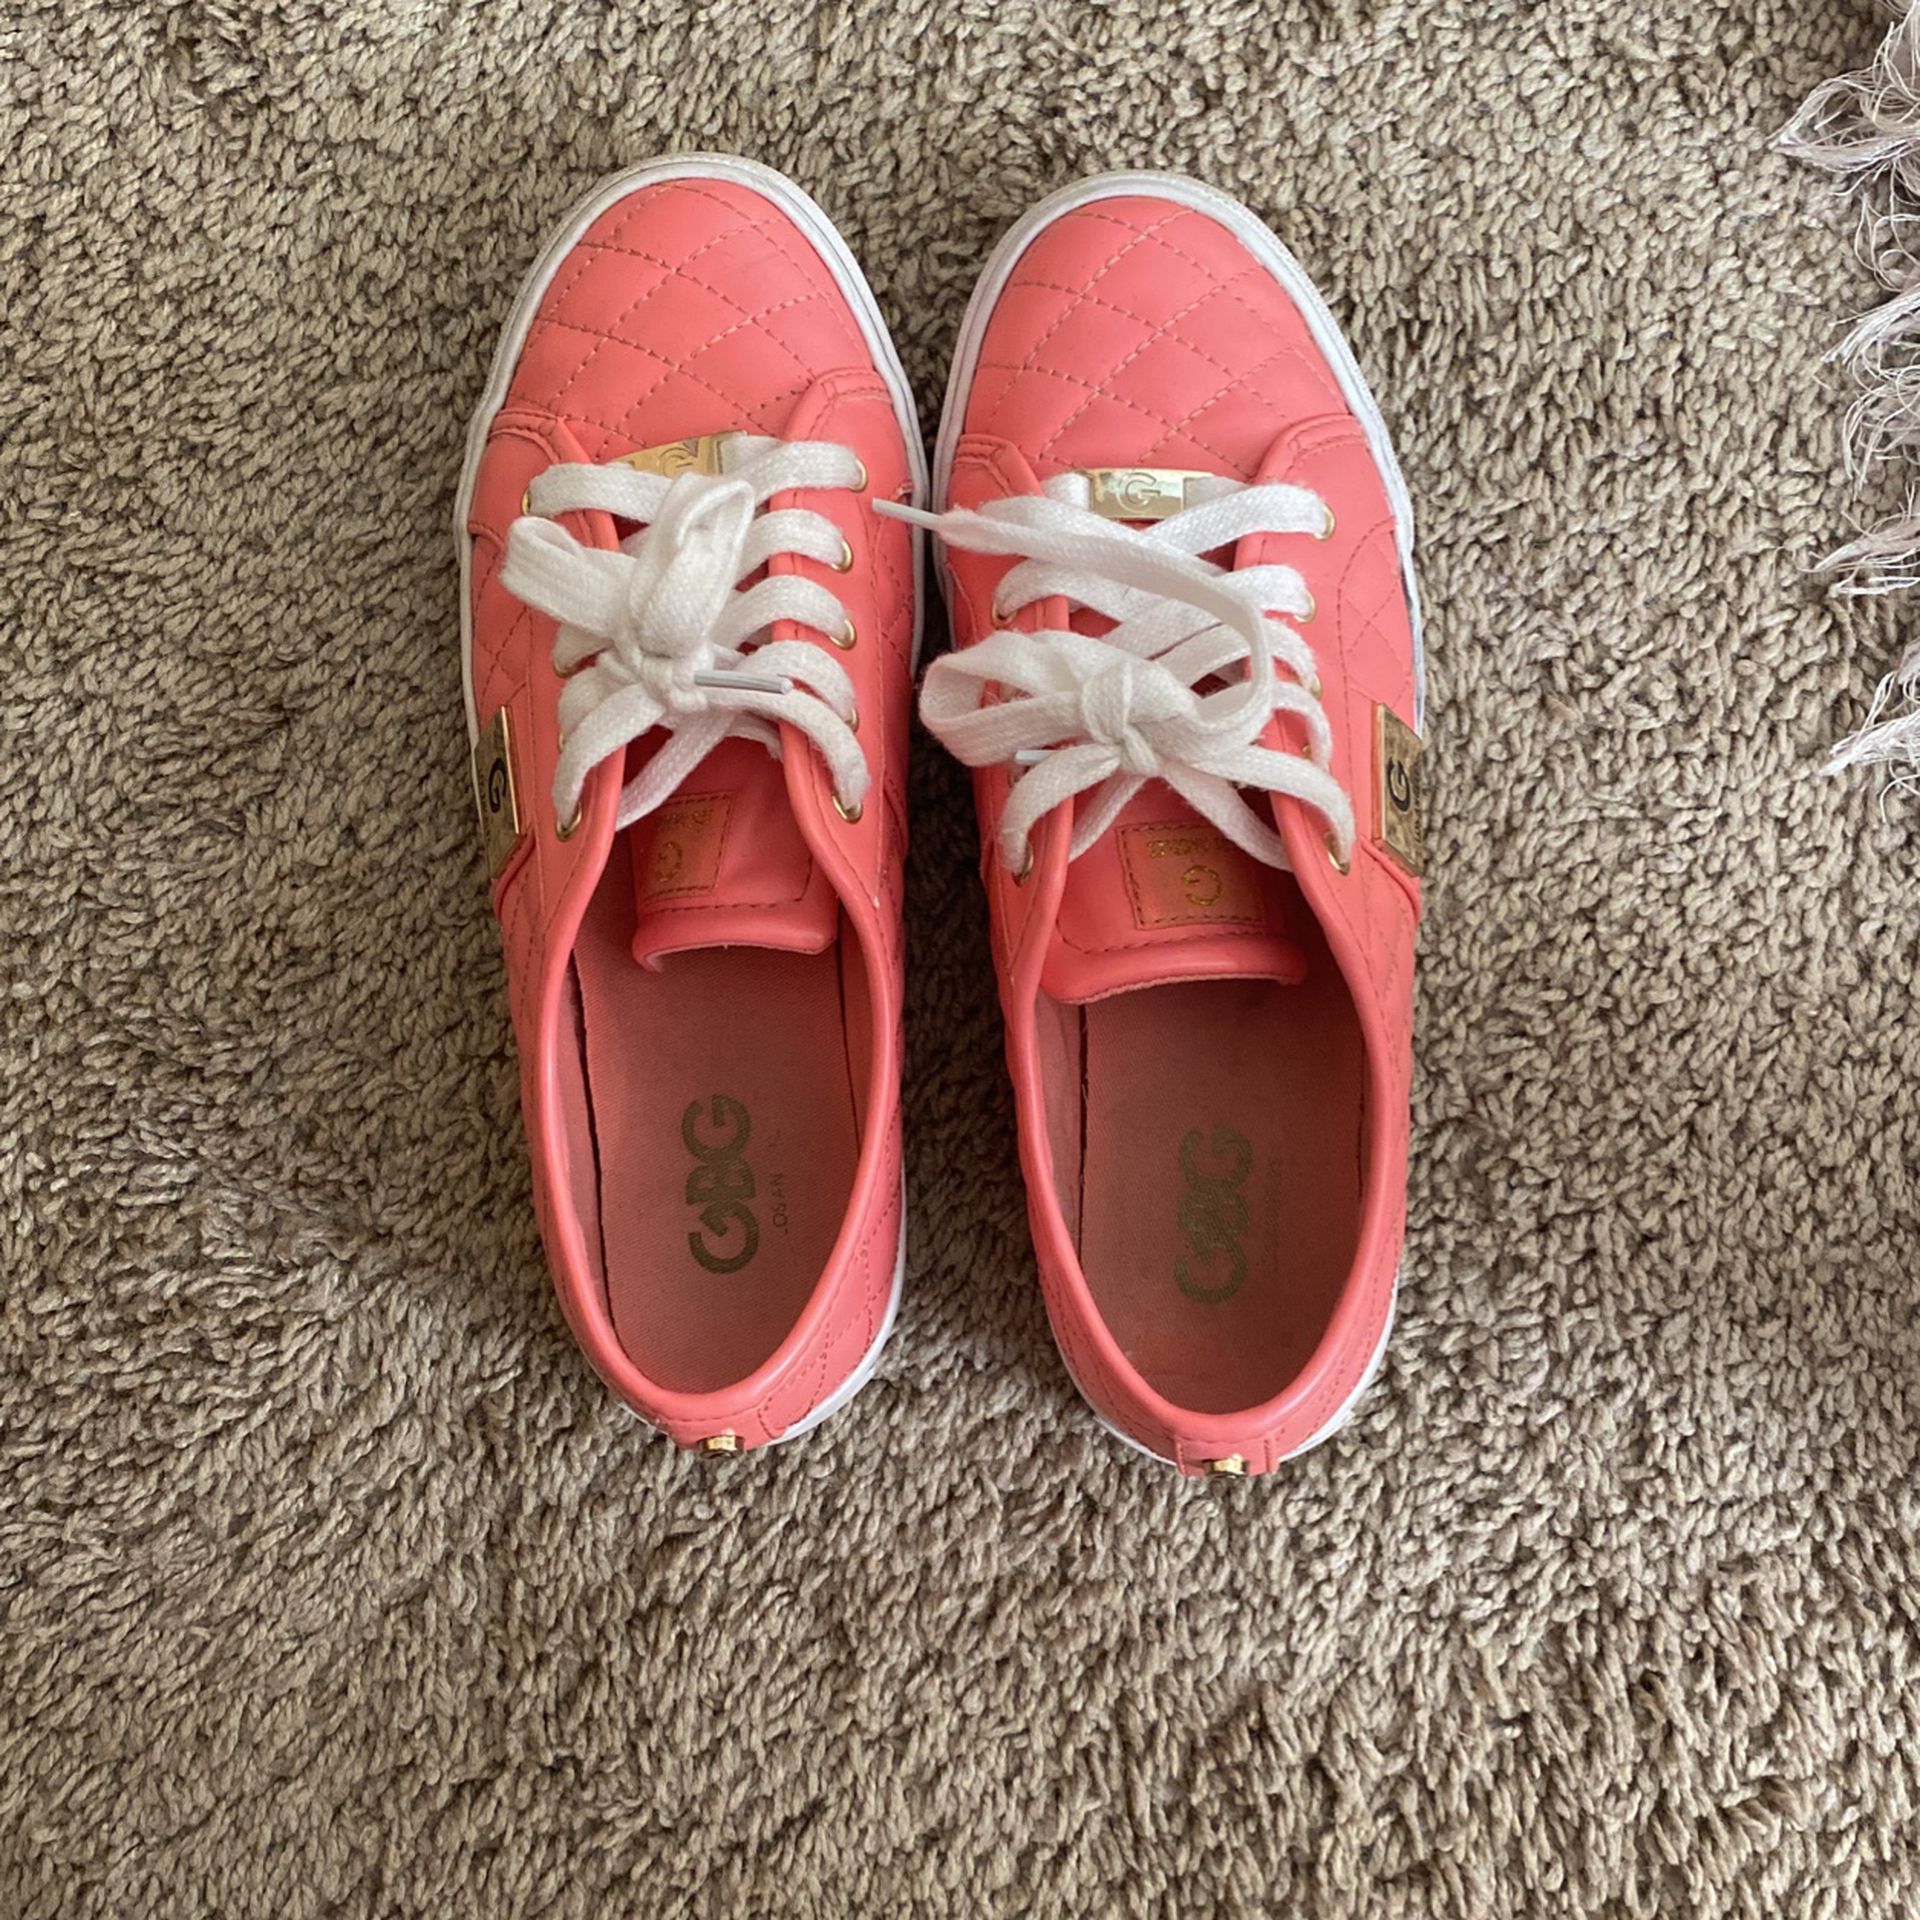 Salmon Pink Shoes, Brand: 7 1/2 Women's for Sale in Richmond, TX -